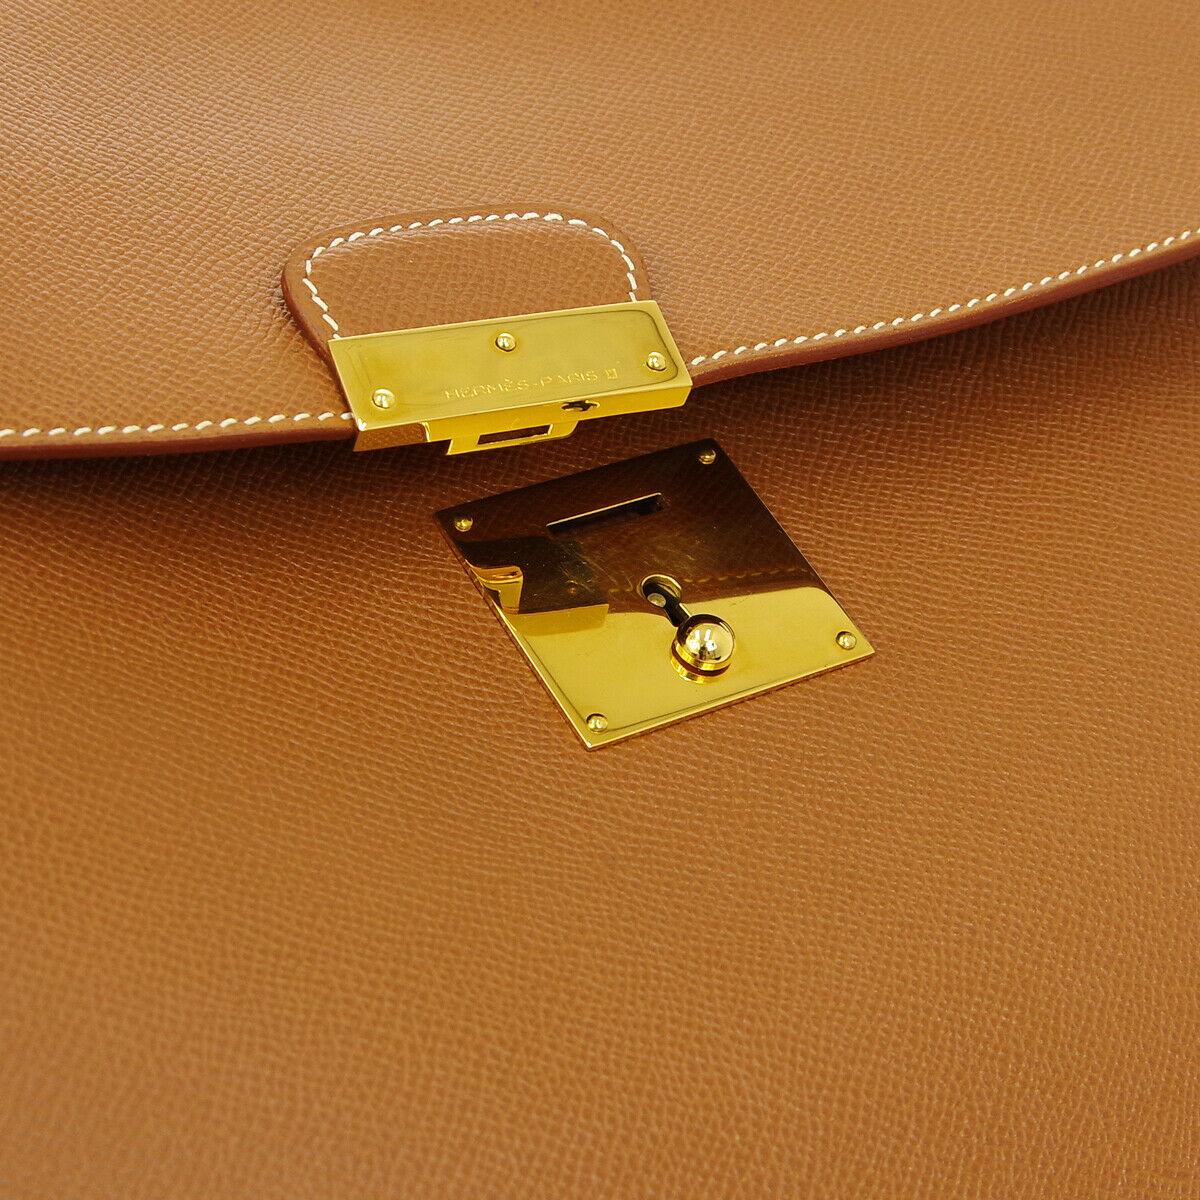 Hermes Cognac Leather Gold Men's Women's Attache Envelope Clutch Bag in Box

Leather
Gold tone hardware
Leather lining
Flip lock closure
Date code present
Made in France	
Measures 15